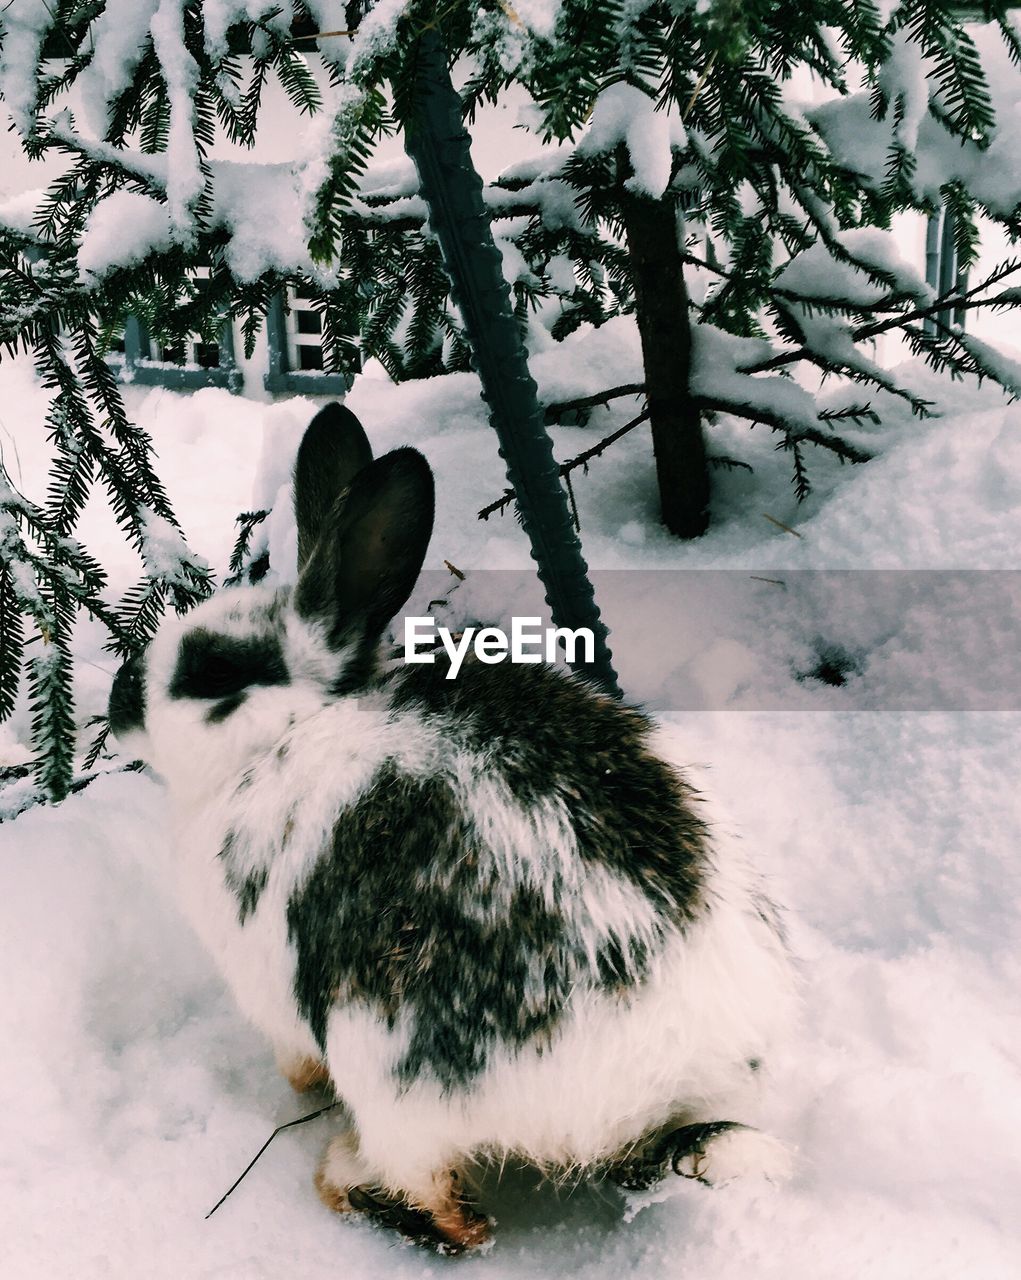 Rabbit on snow covered field